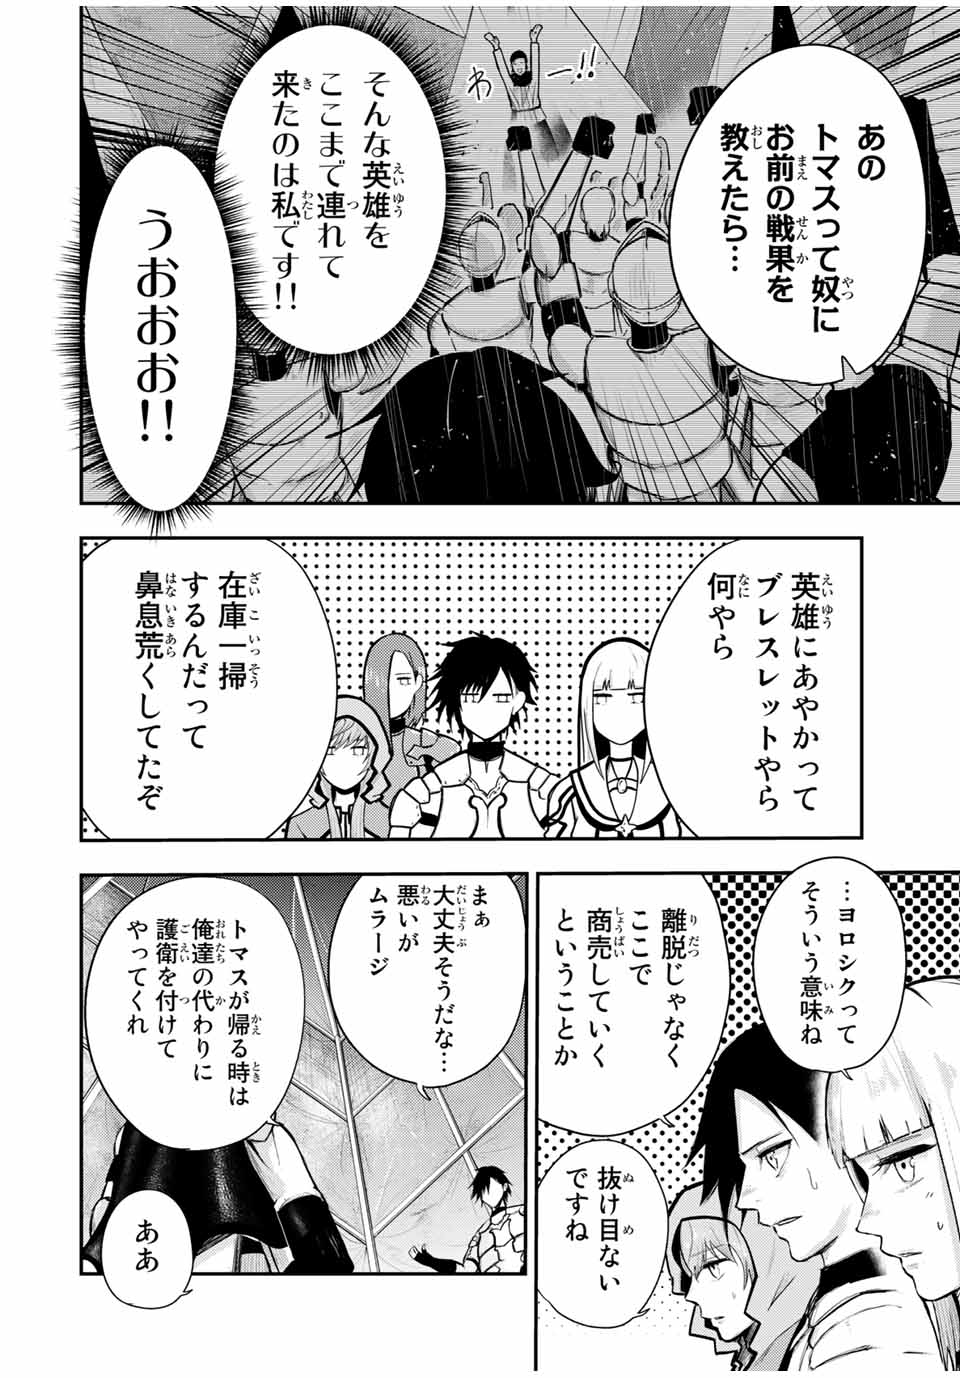 the strongest former prince-; 奴隷転生 ～その奴隷、最強の元王子につき～ 第32話 - Page 8